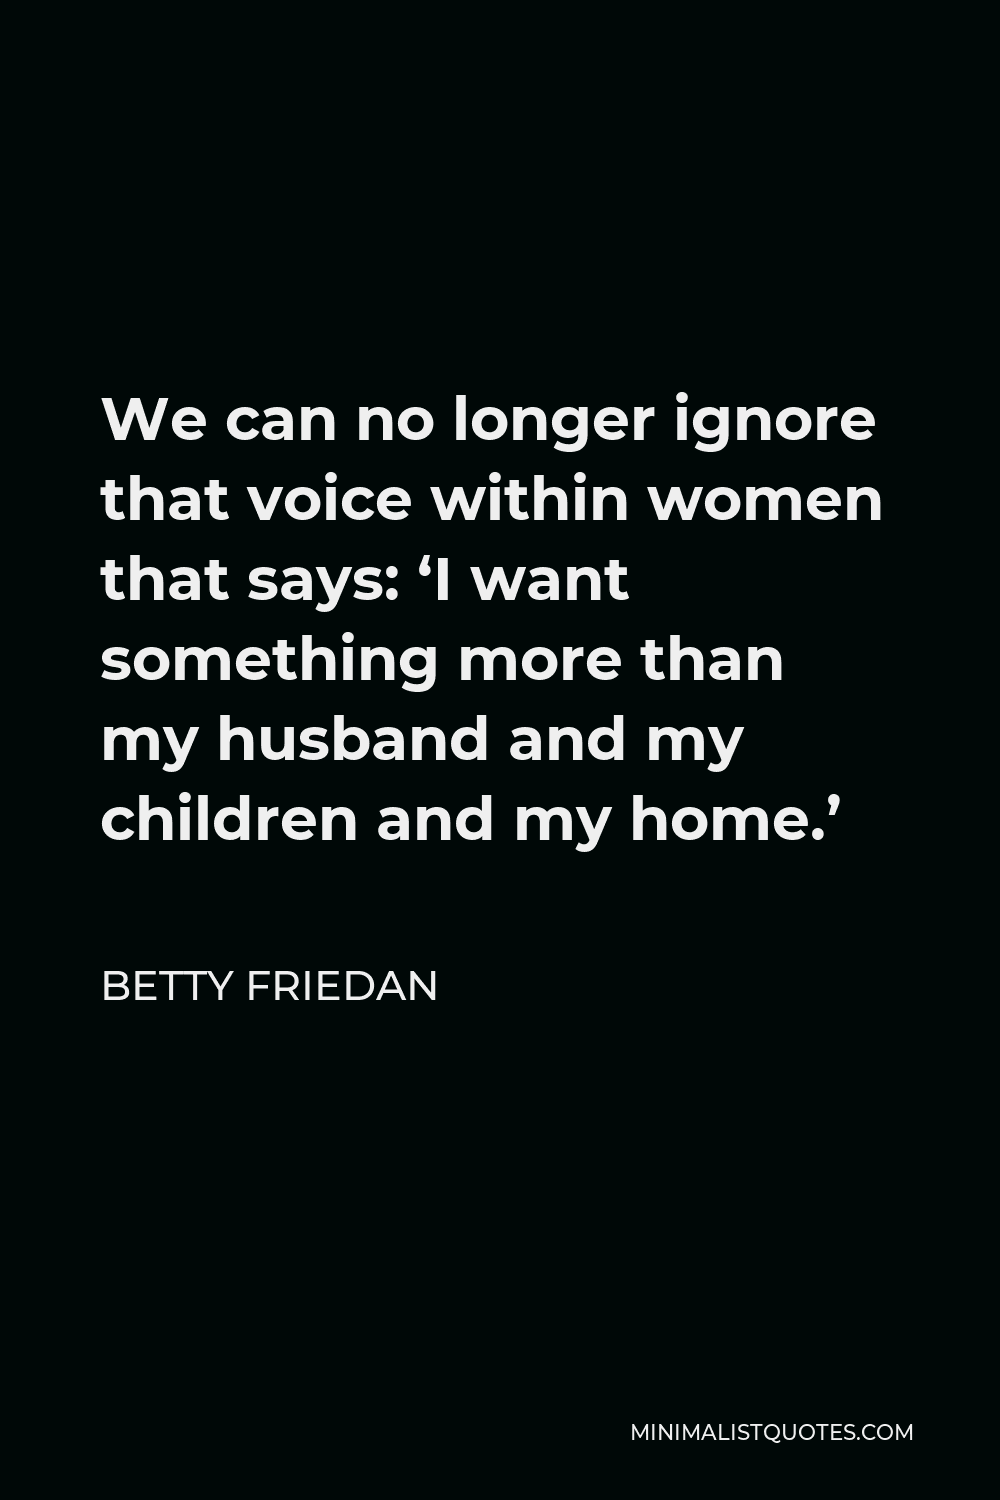 Betty Friedan Quote - We can no longer ignore that voice within women that says: ‘I want something more than my husband and my children and my home.’